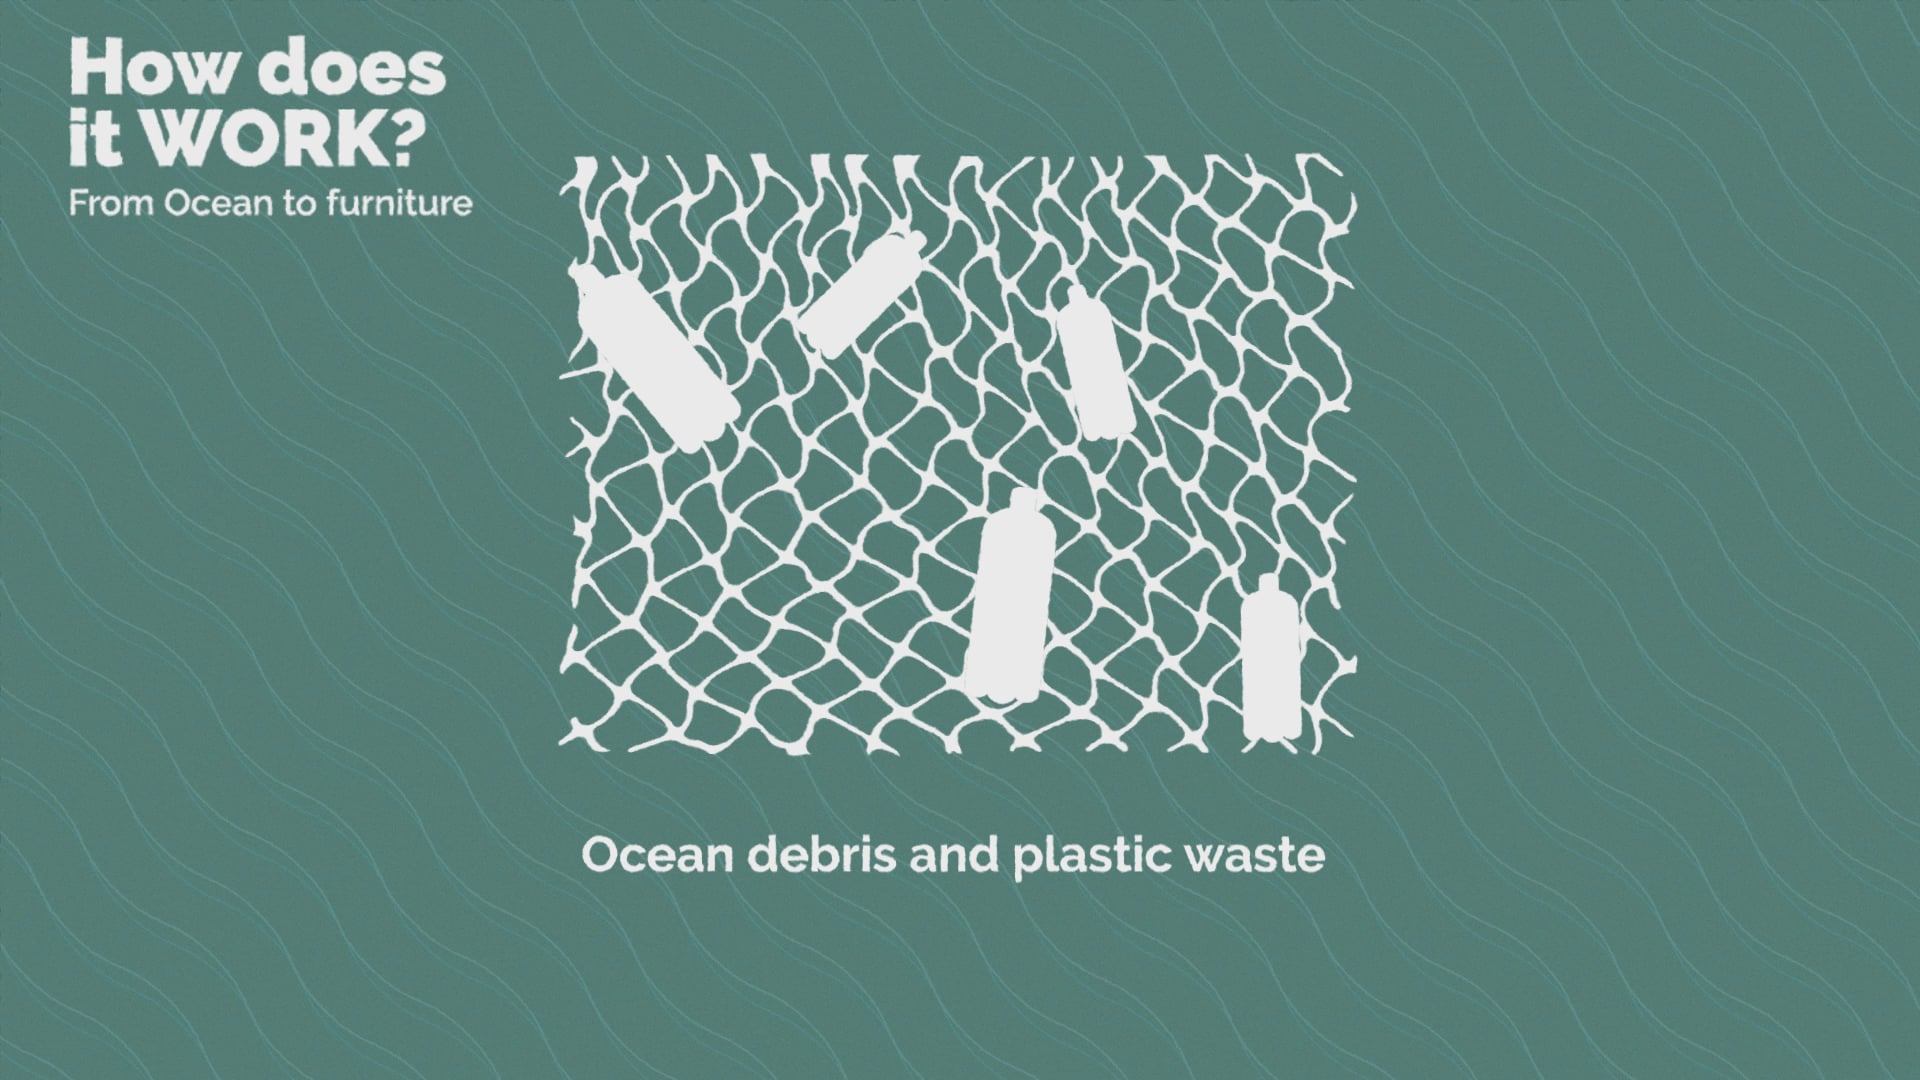 DURAOCEAN | HOW DOES IT WORK FROM OCEAN TO FURNITURE